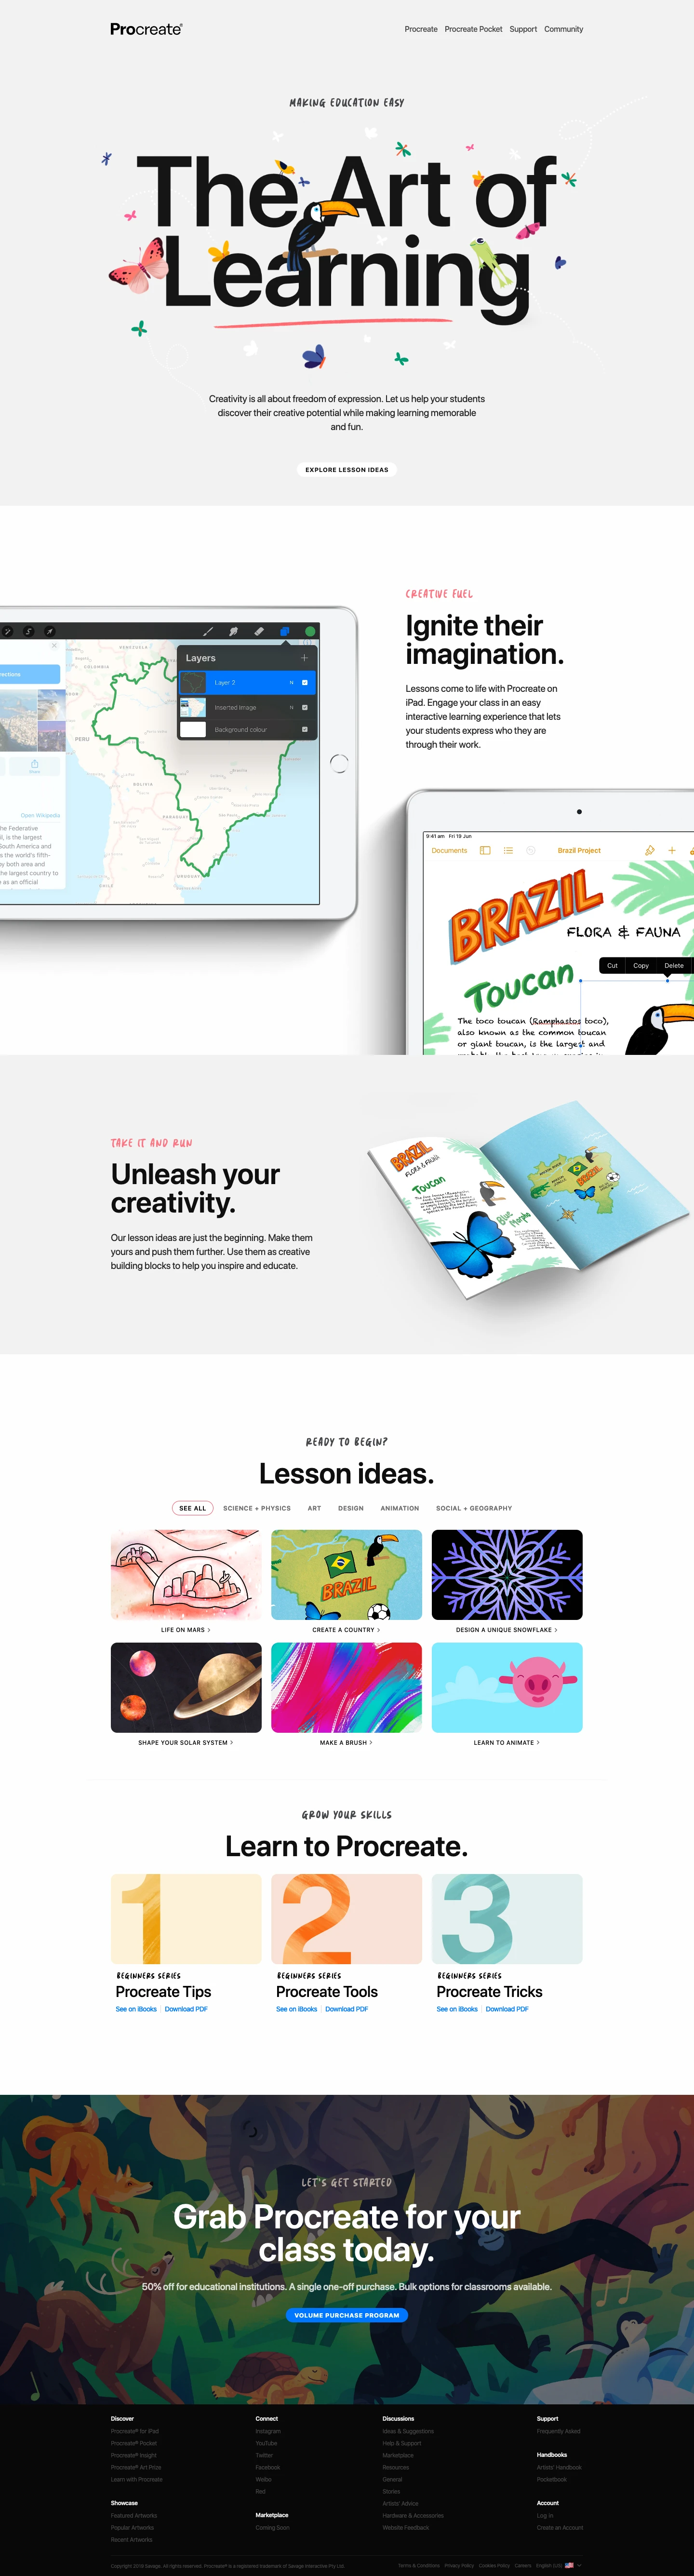 Procreate Education Landing Page Example: Creativity is all about freedom of expression. Let us help your students discover their creative potential while making learning memorable and fun.